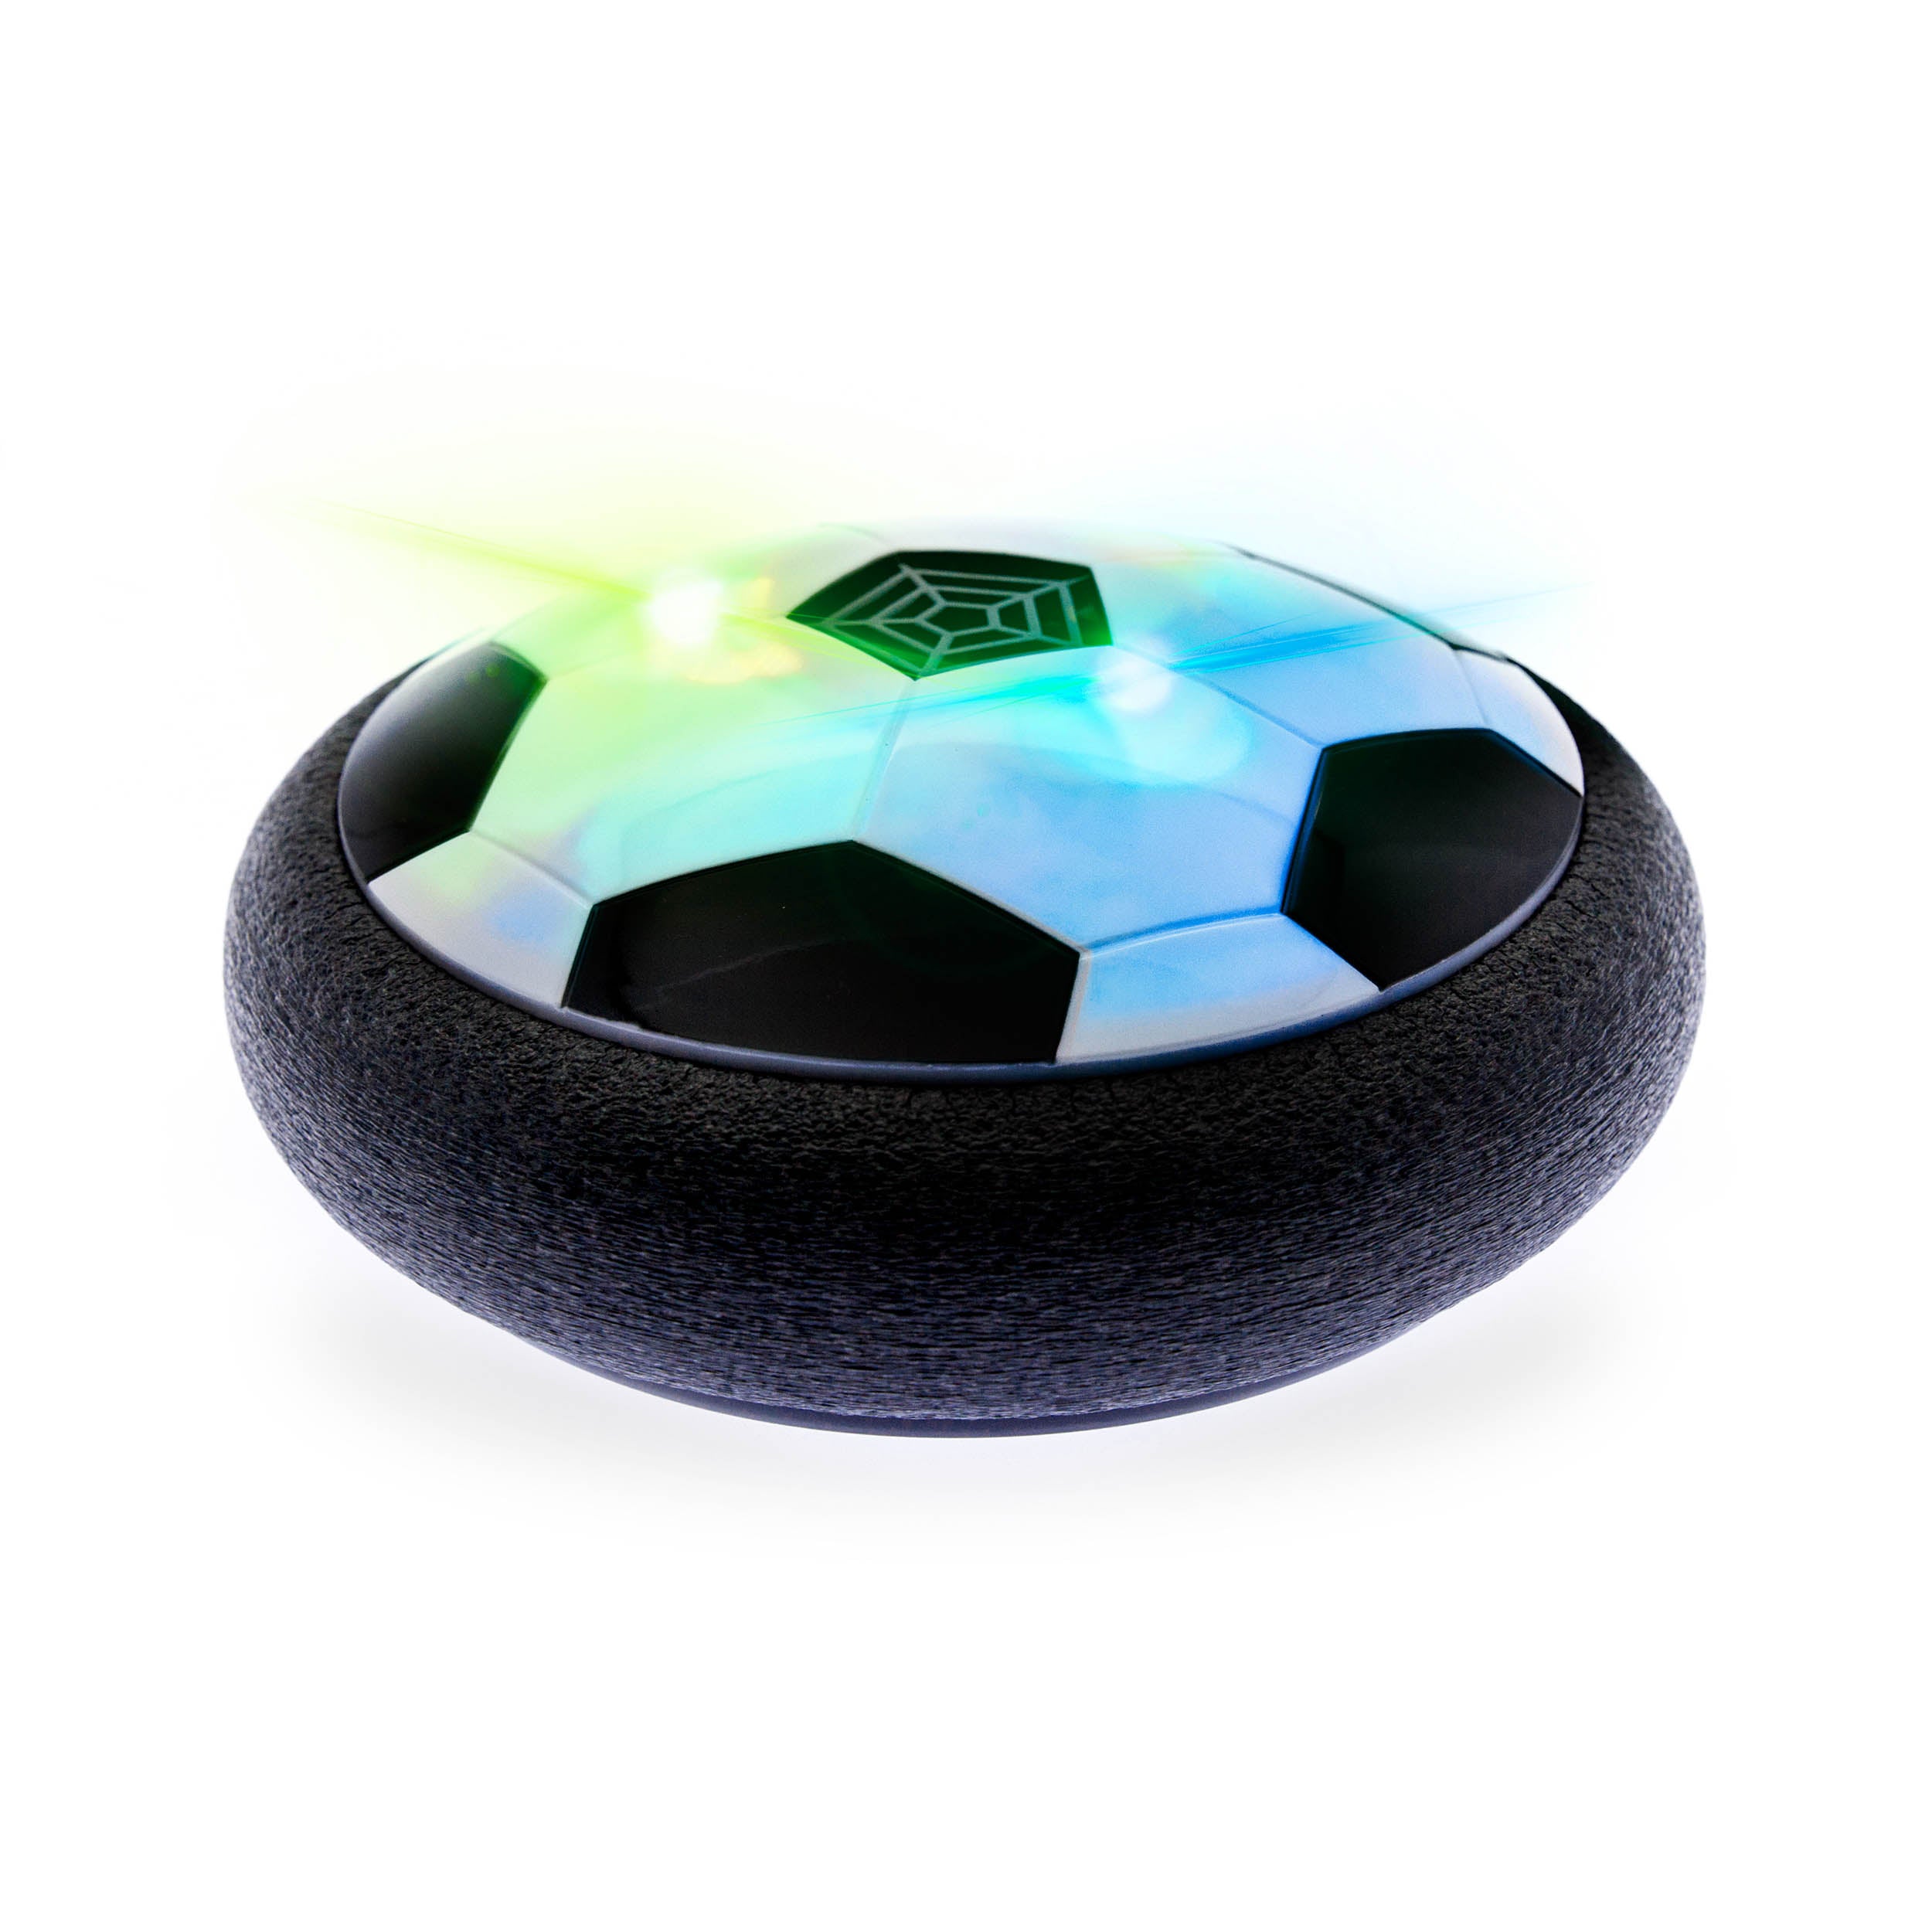 PicassoTiles Hover Soccer Ball with Protective Bumper Foam